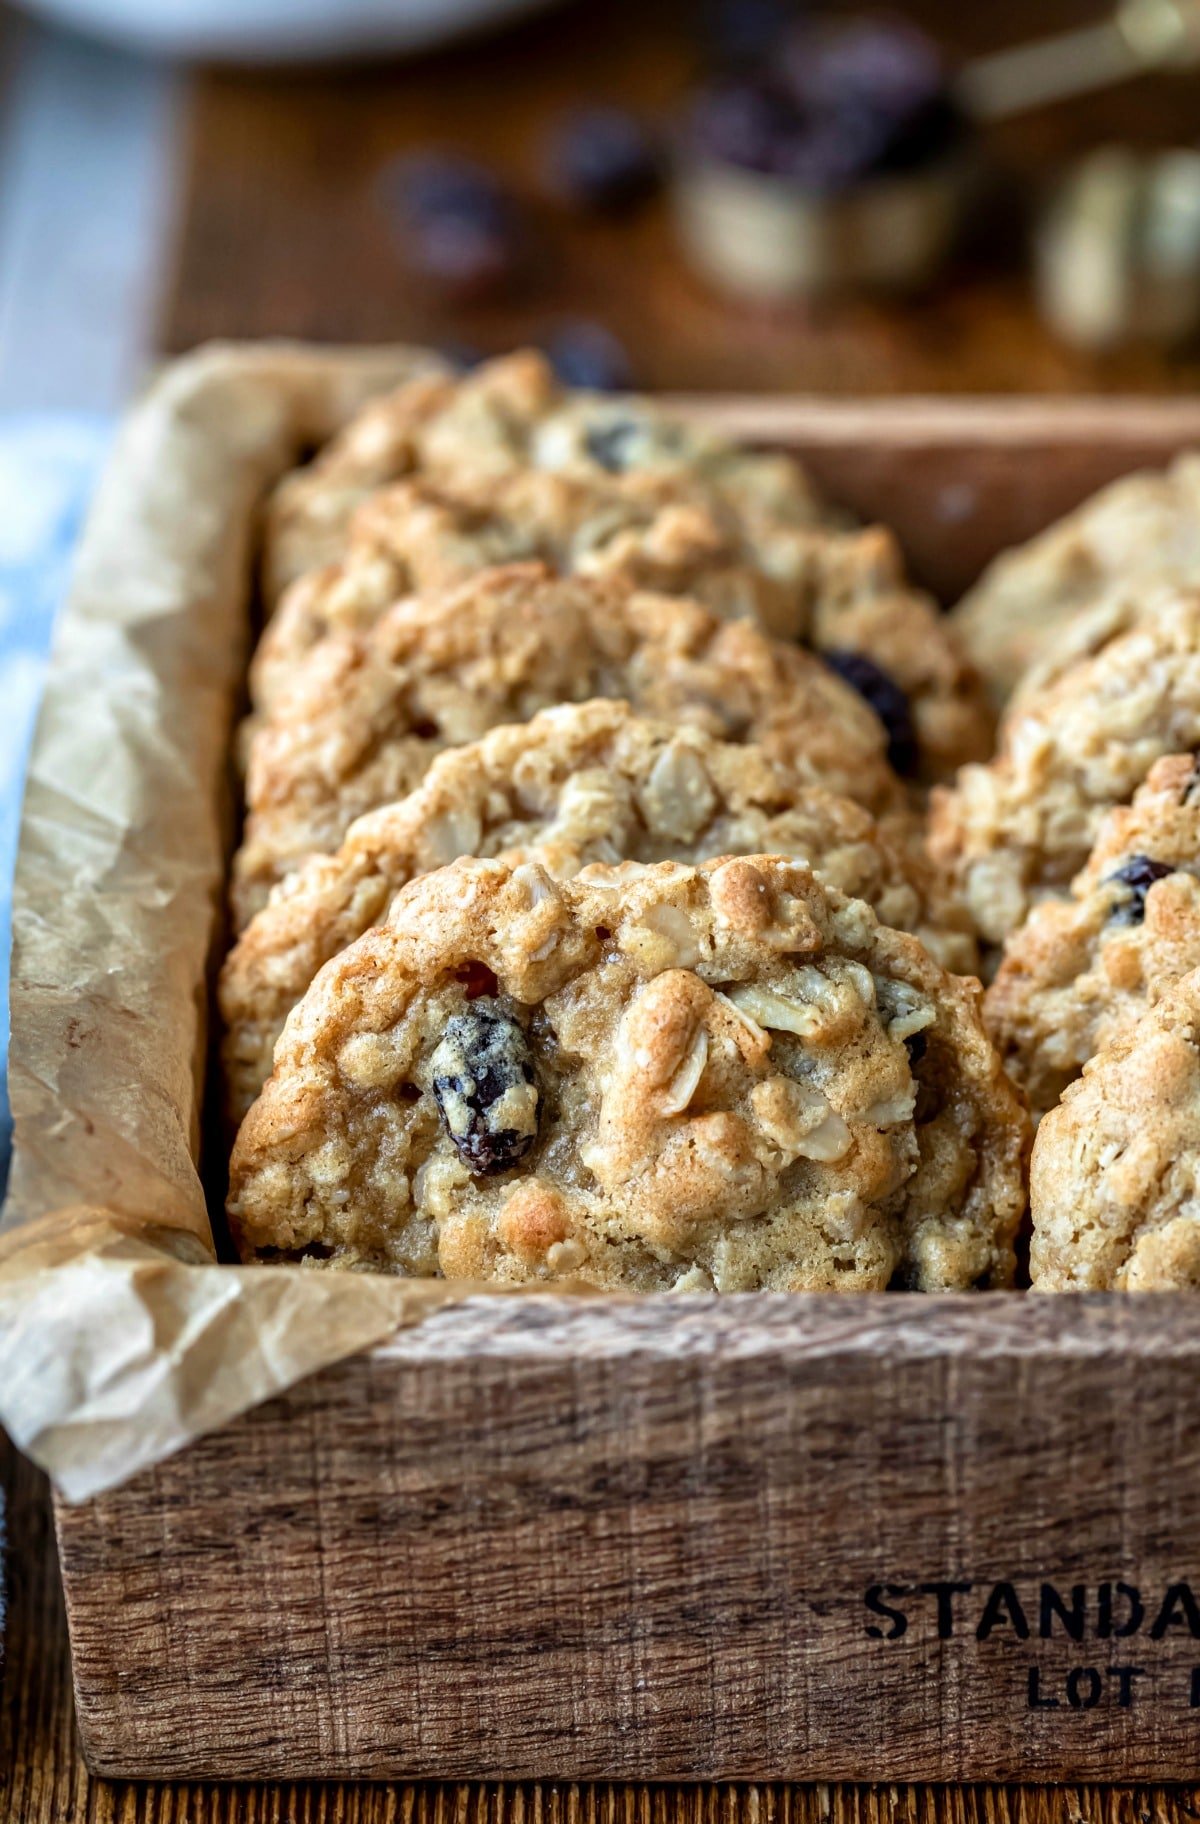 Oatmeal raisin cookies in a wooden box